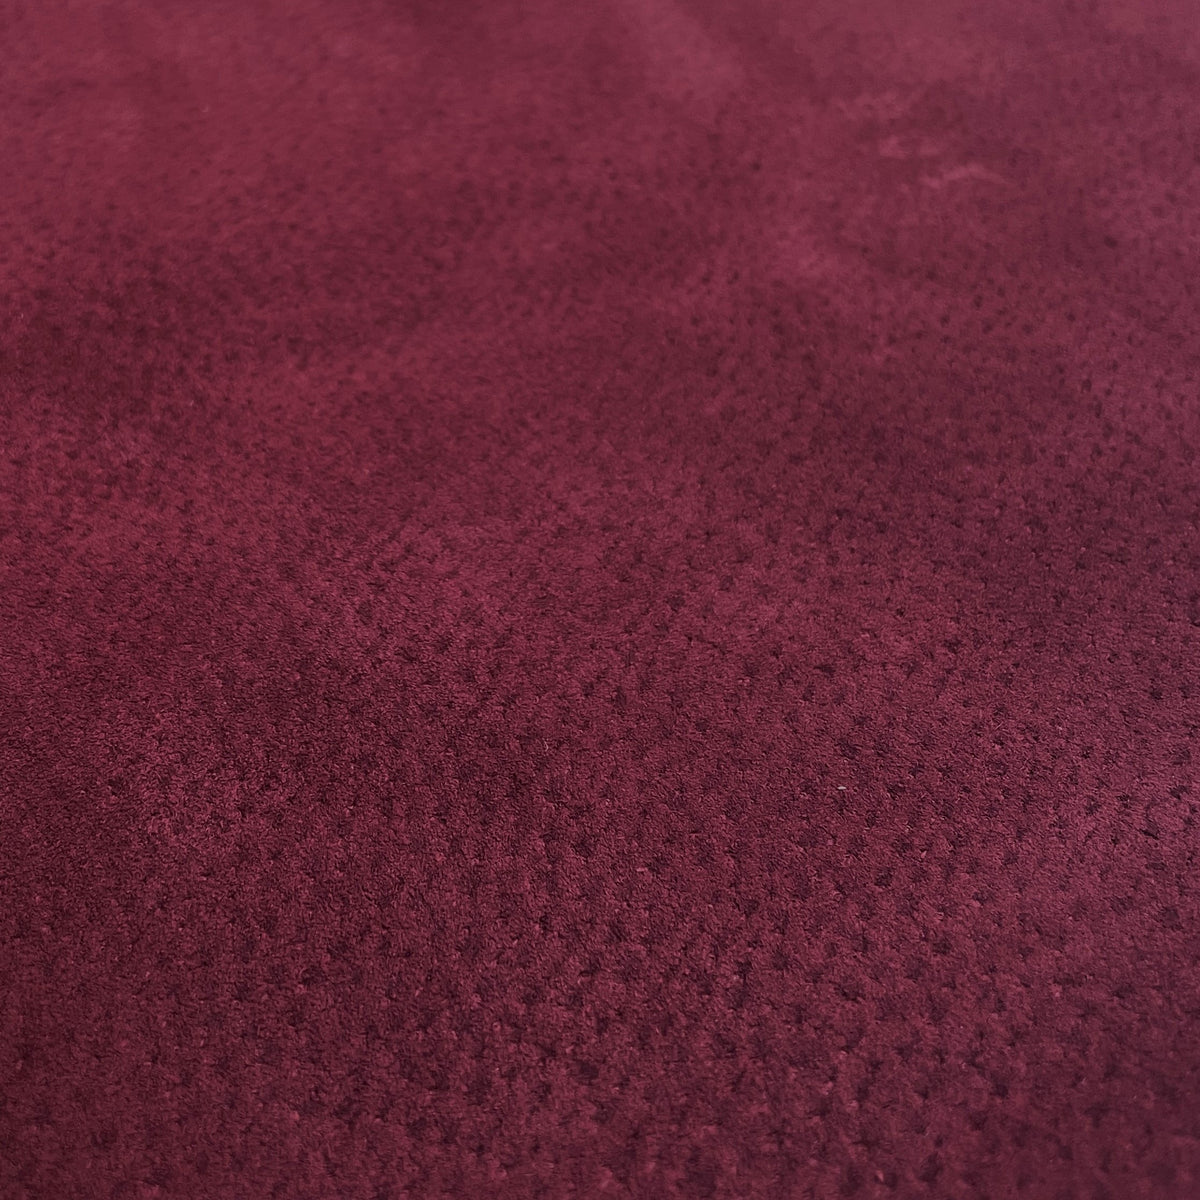 Pig Skin Suede | Burgundy | 0.6 mm | 8 sq.ft | From $25 ea.